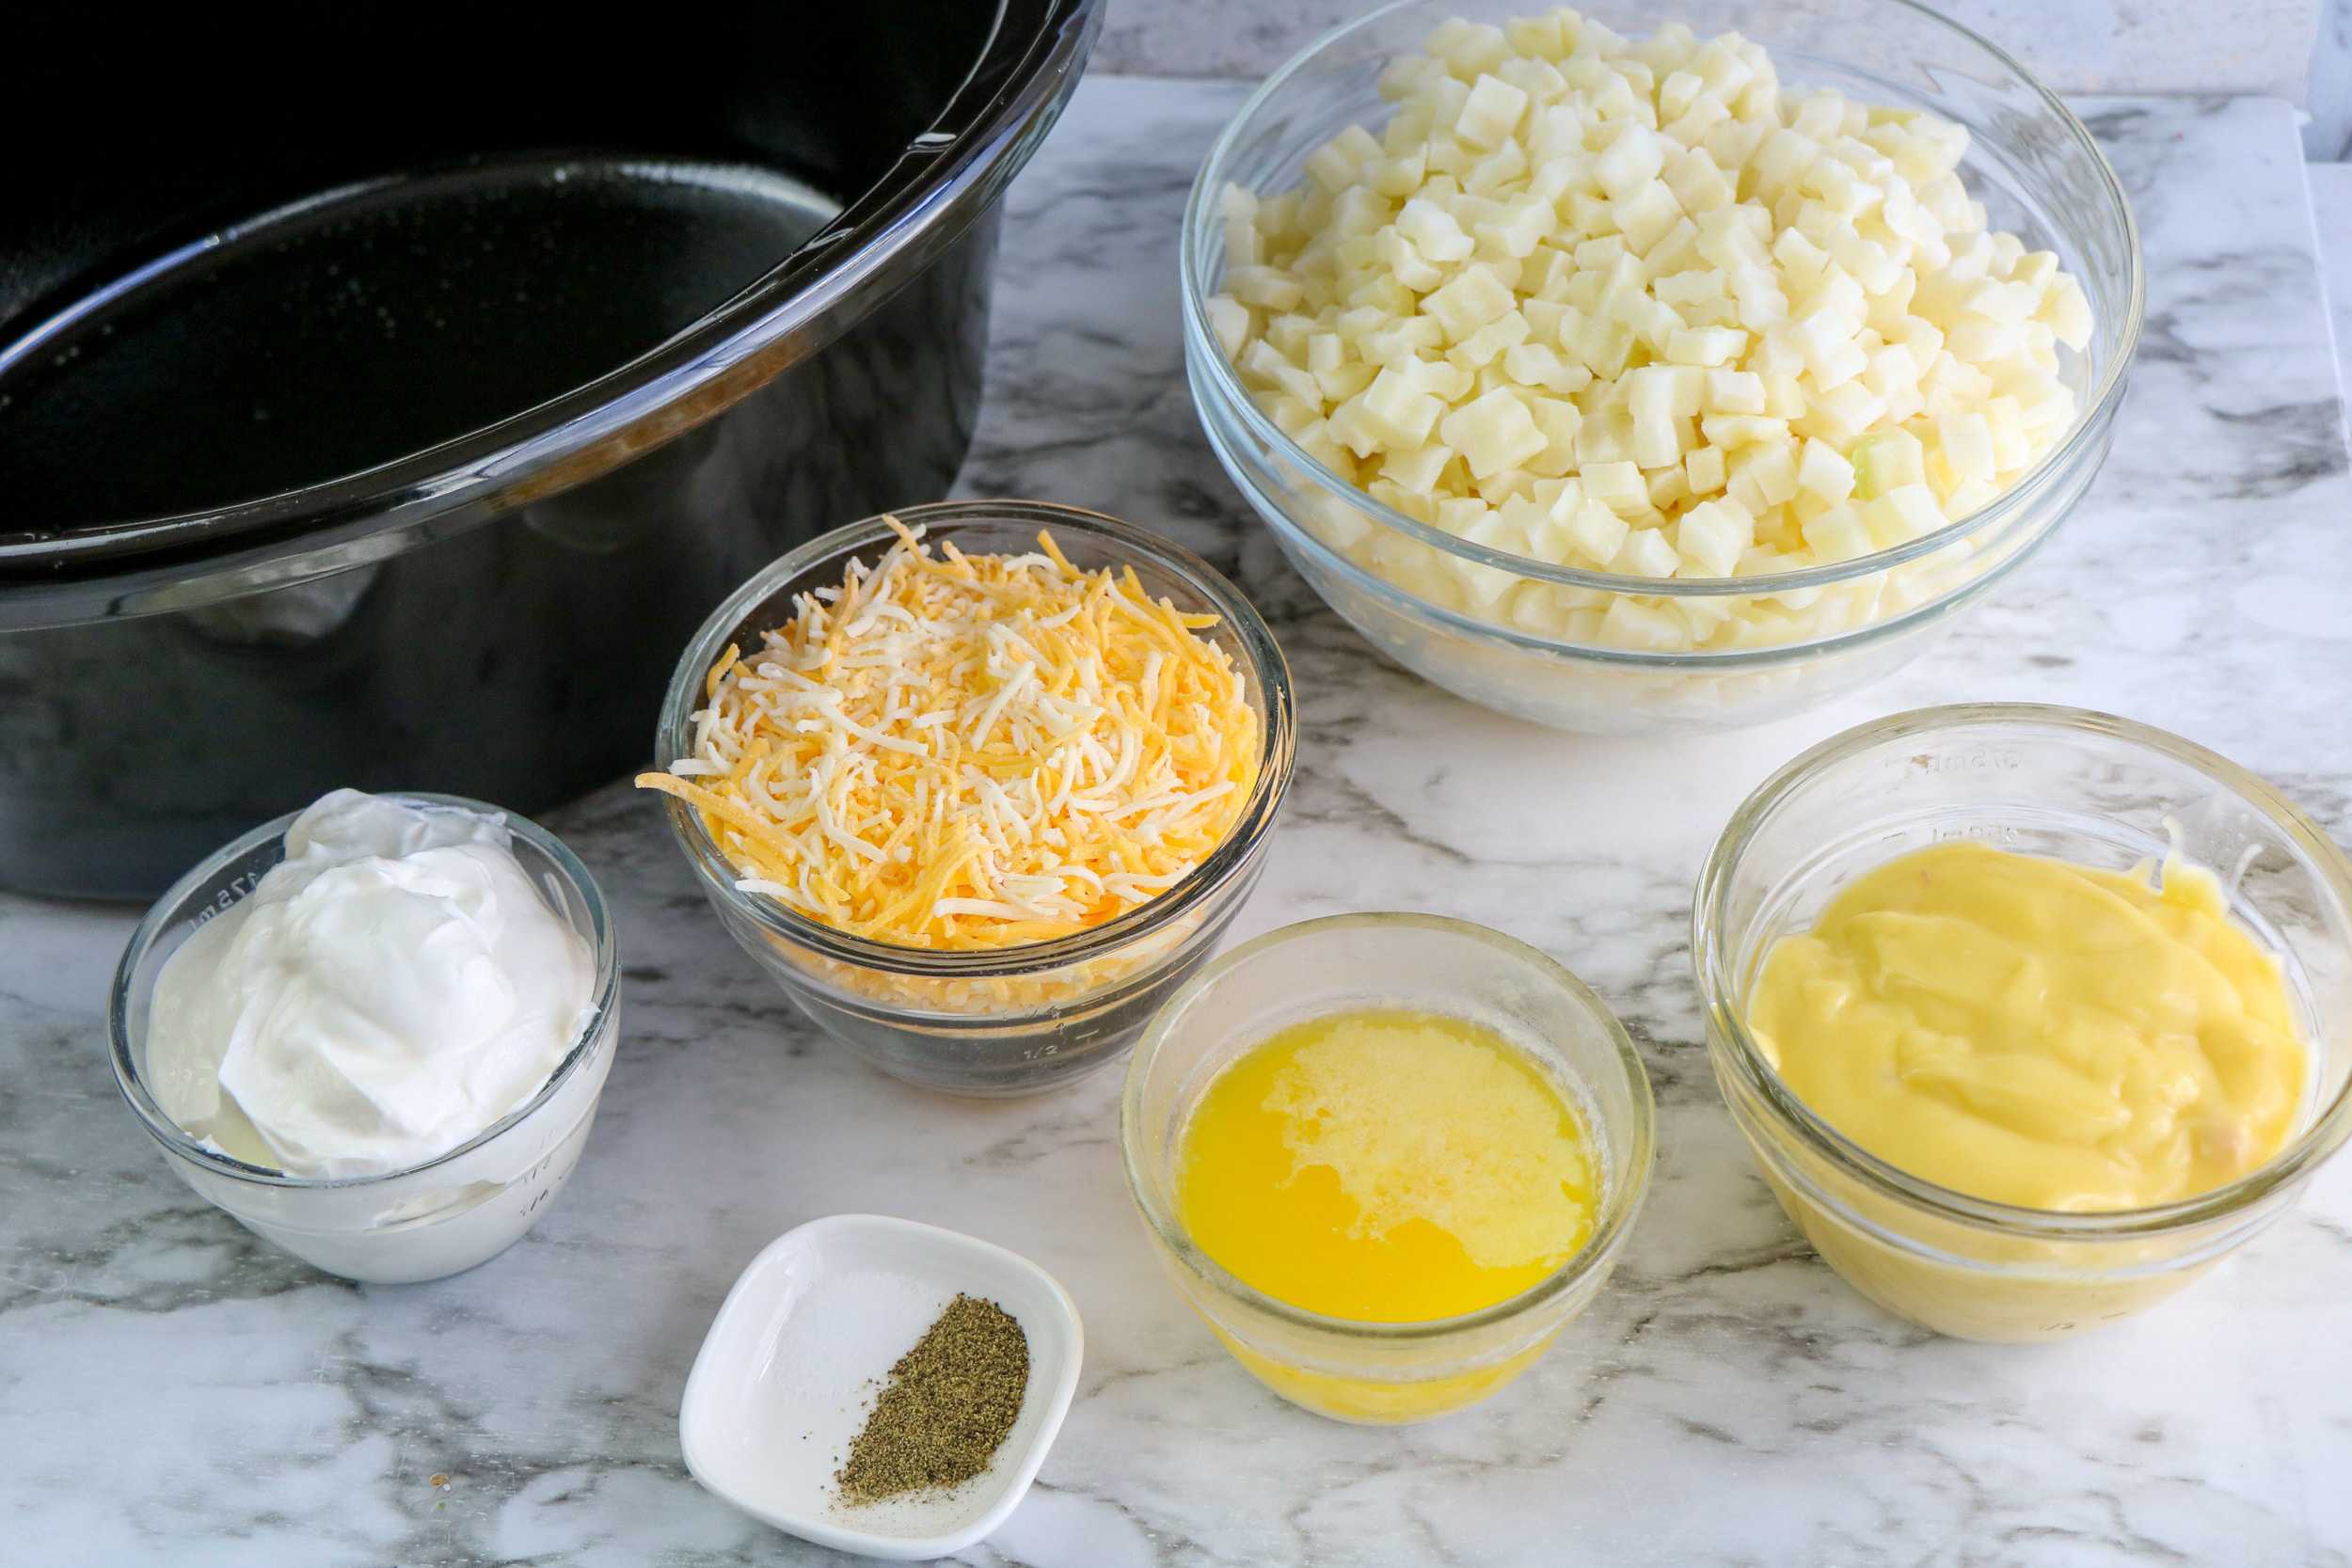 Ingredients for Slow Cooker hashbrown casserole